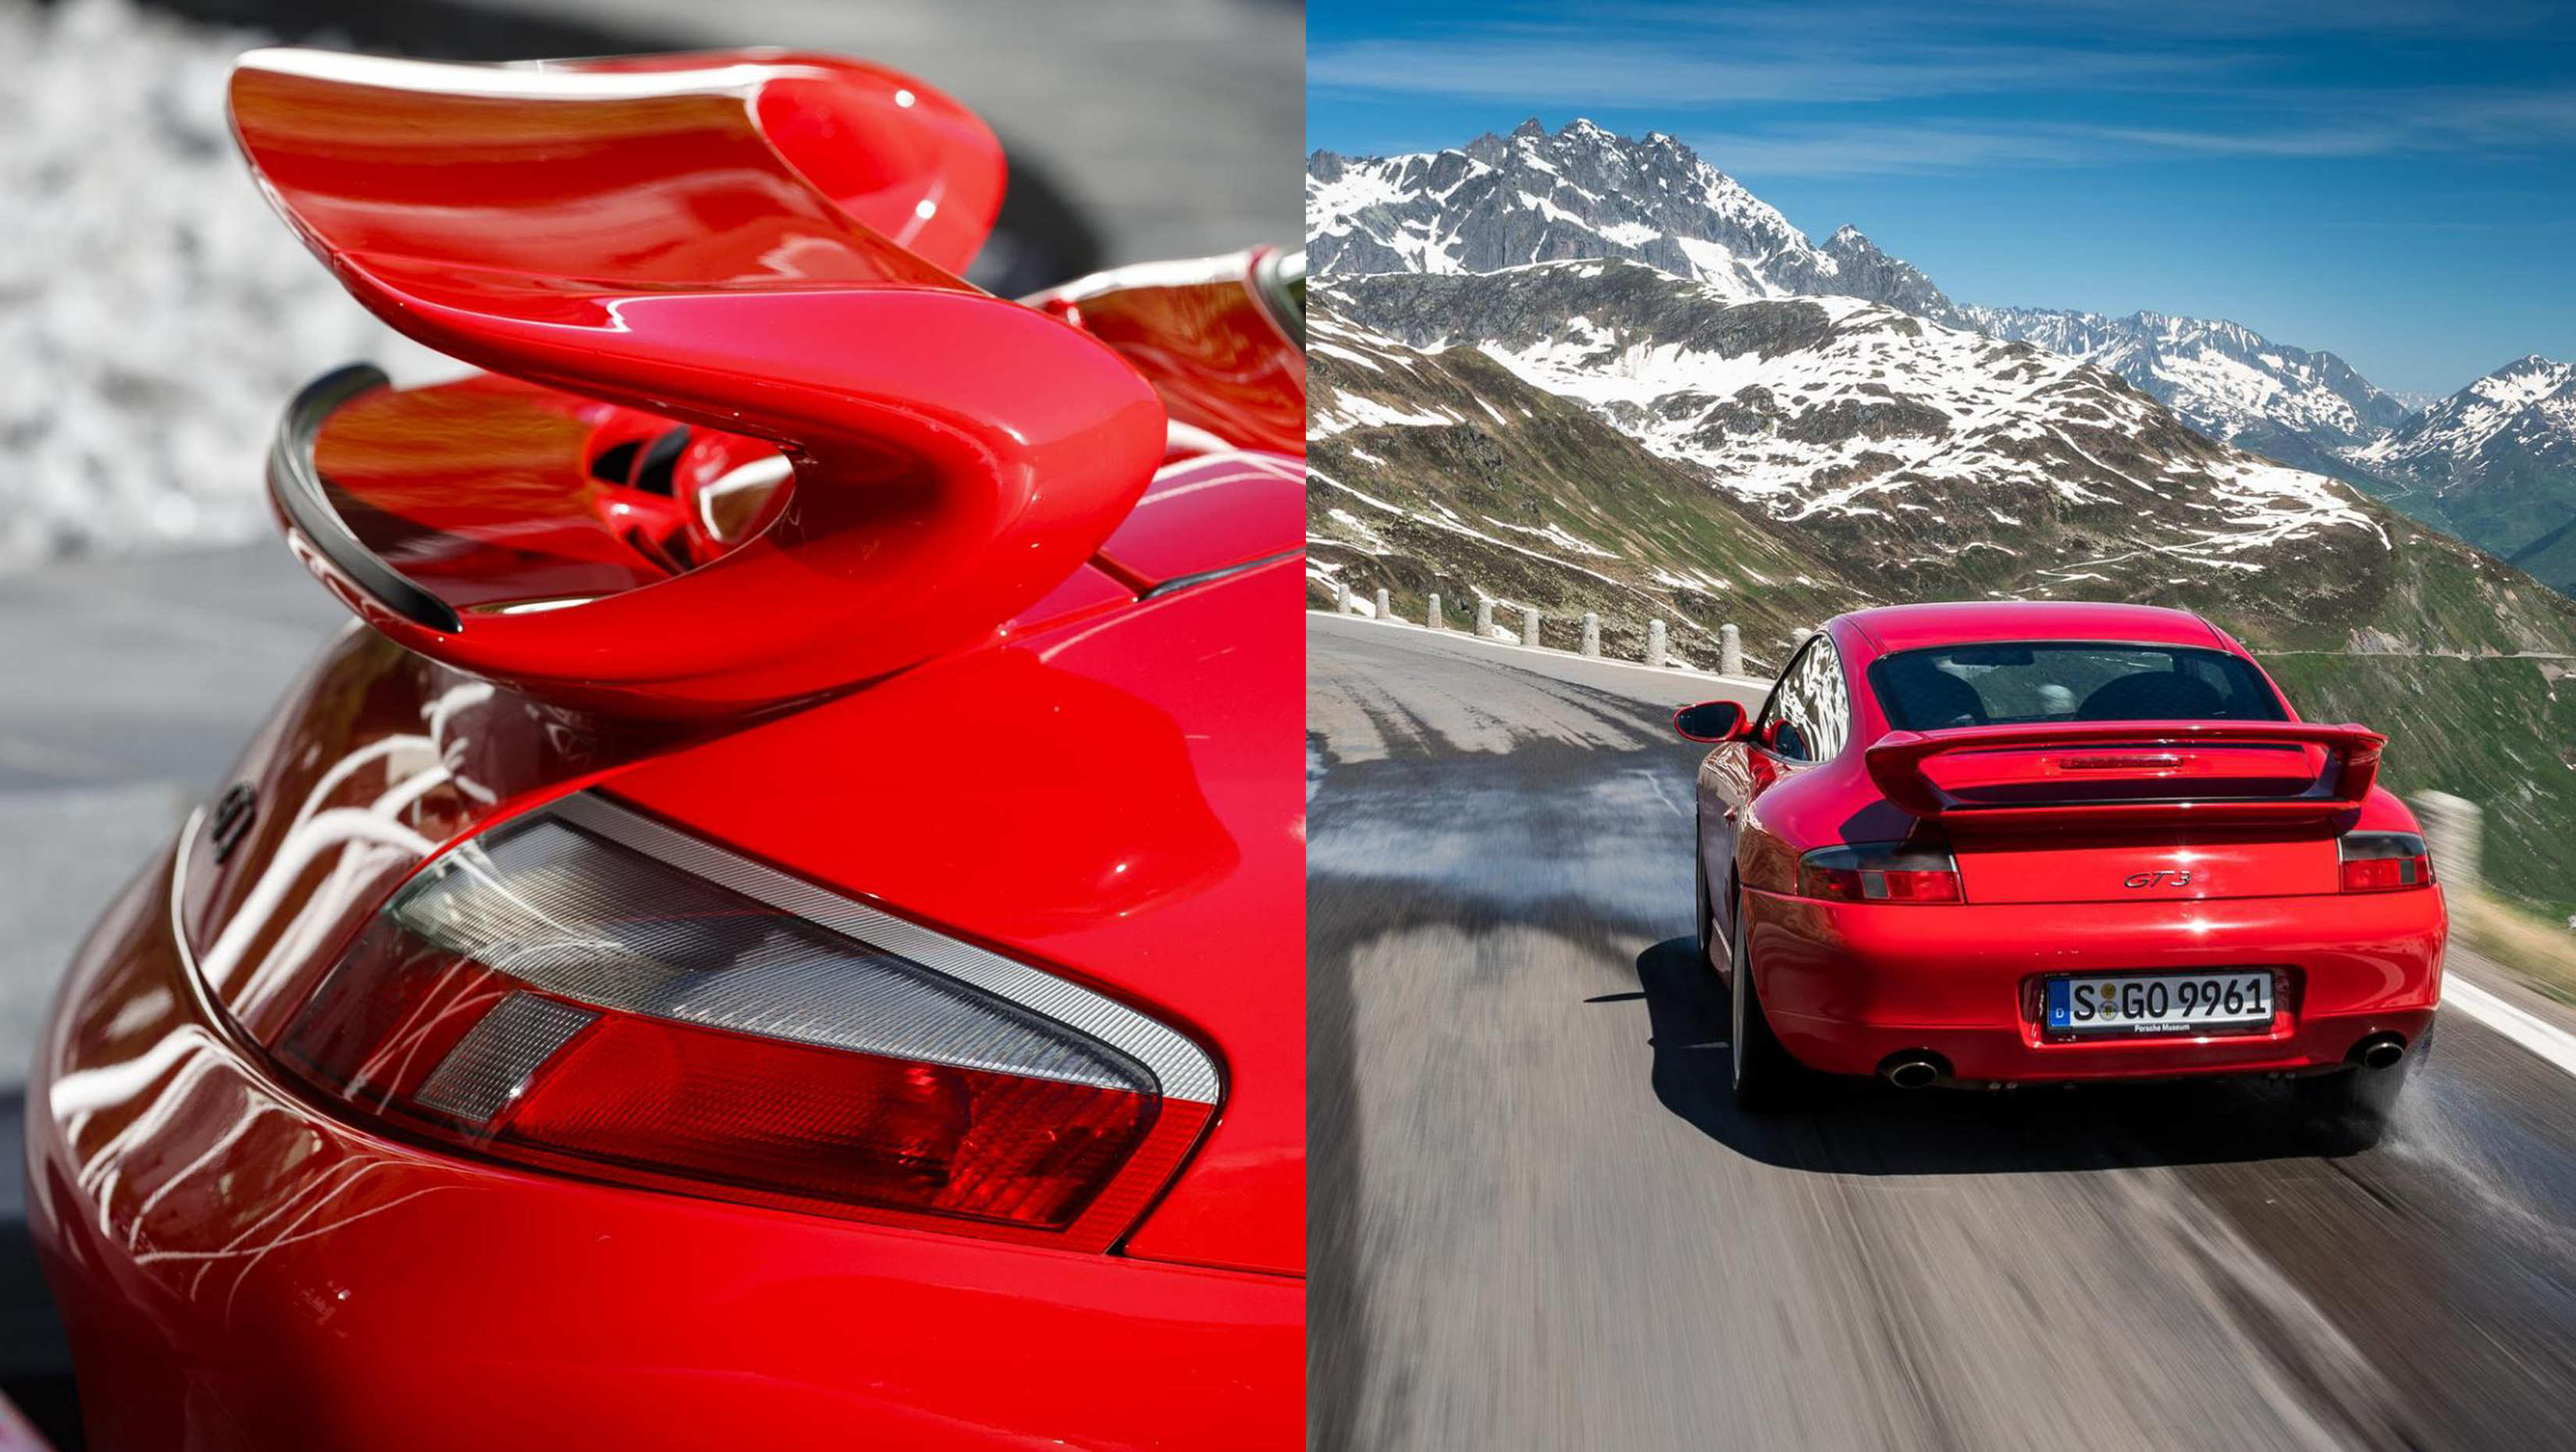 Red Porsche 911 GT3 with taco spoiler in front of snow-capped mountains